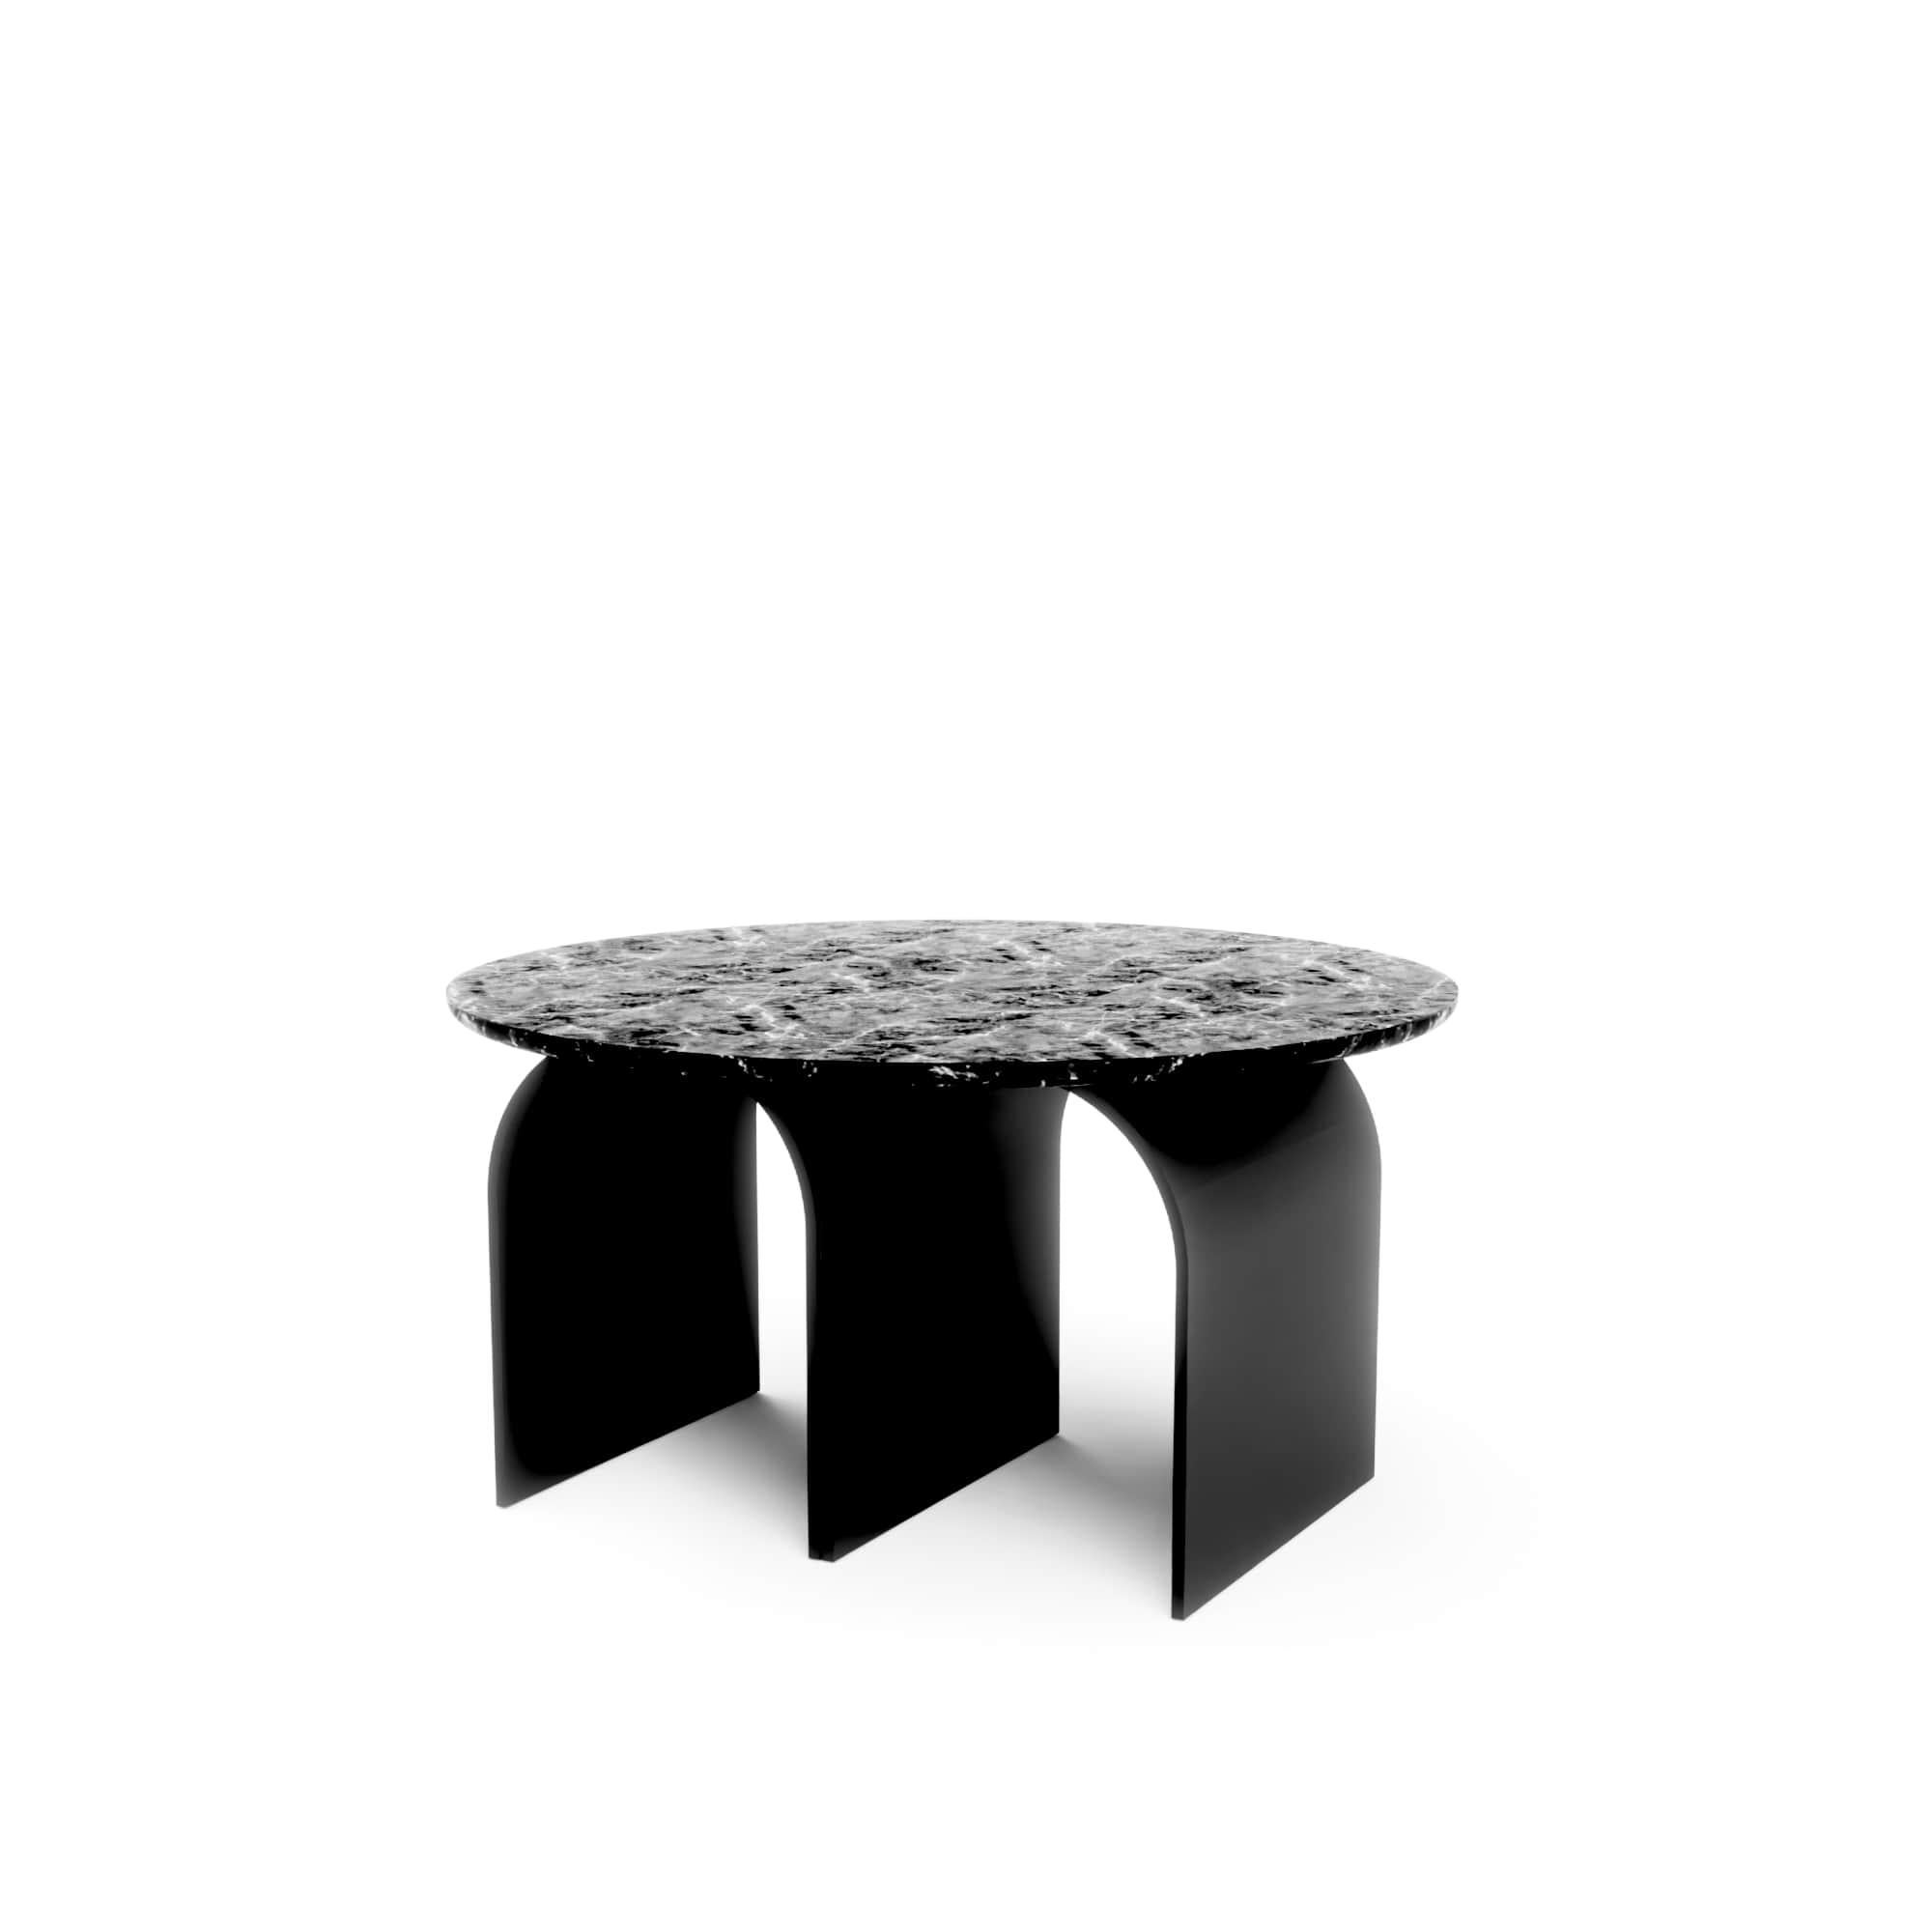 European Arcade Coffee Table, Rounded Marble Version, by Kasadamo & Pierre Tassin For Sale